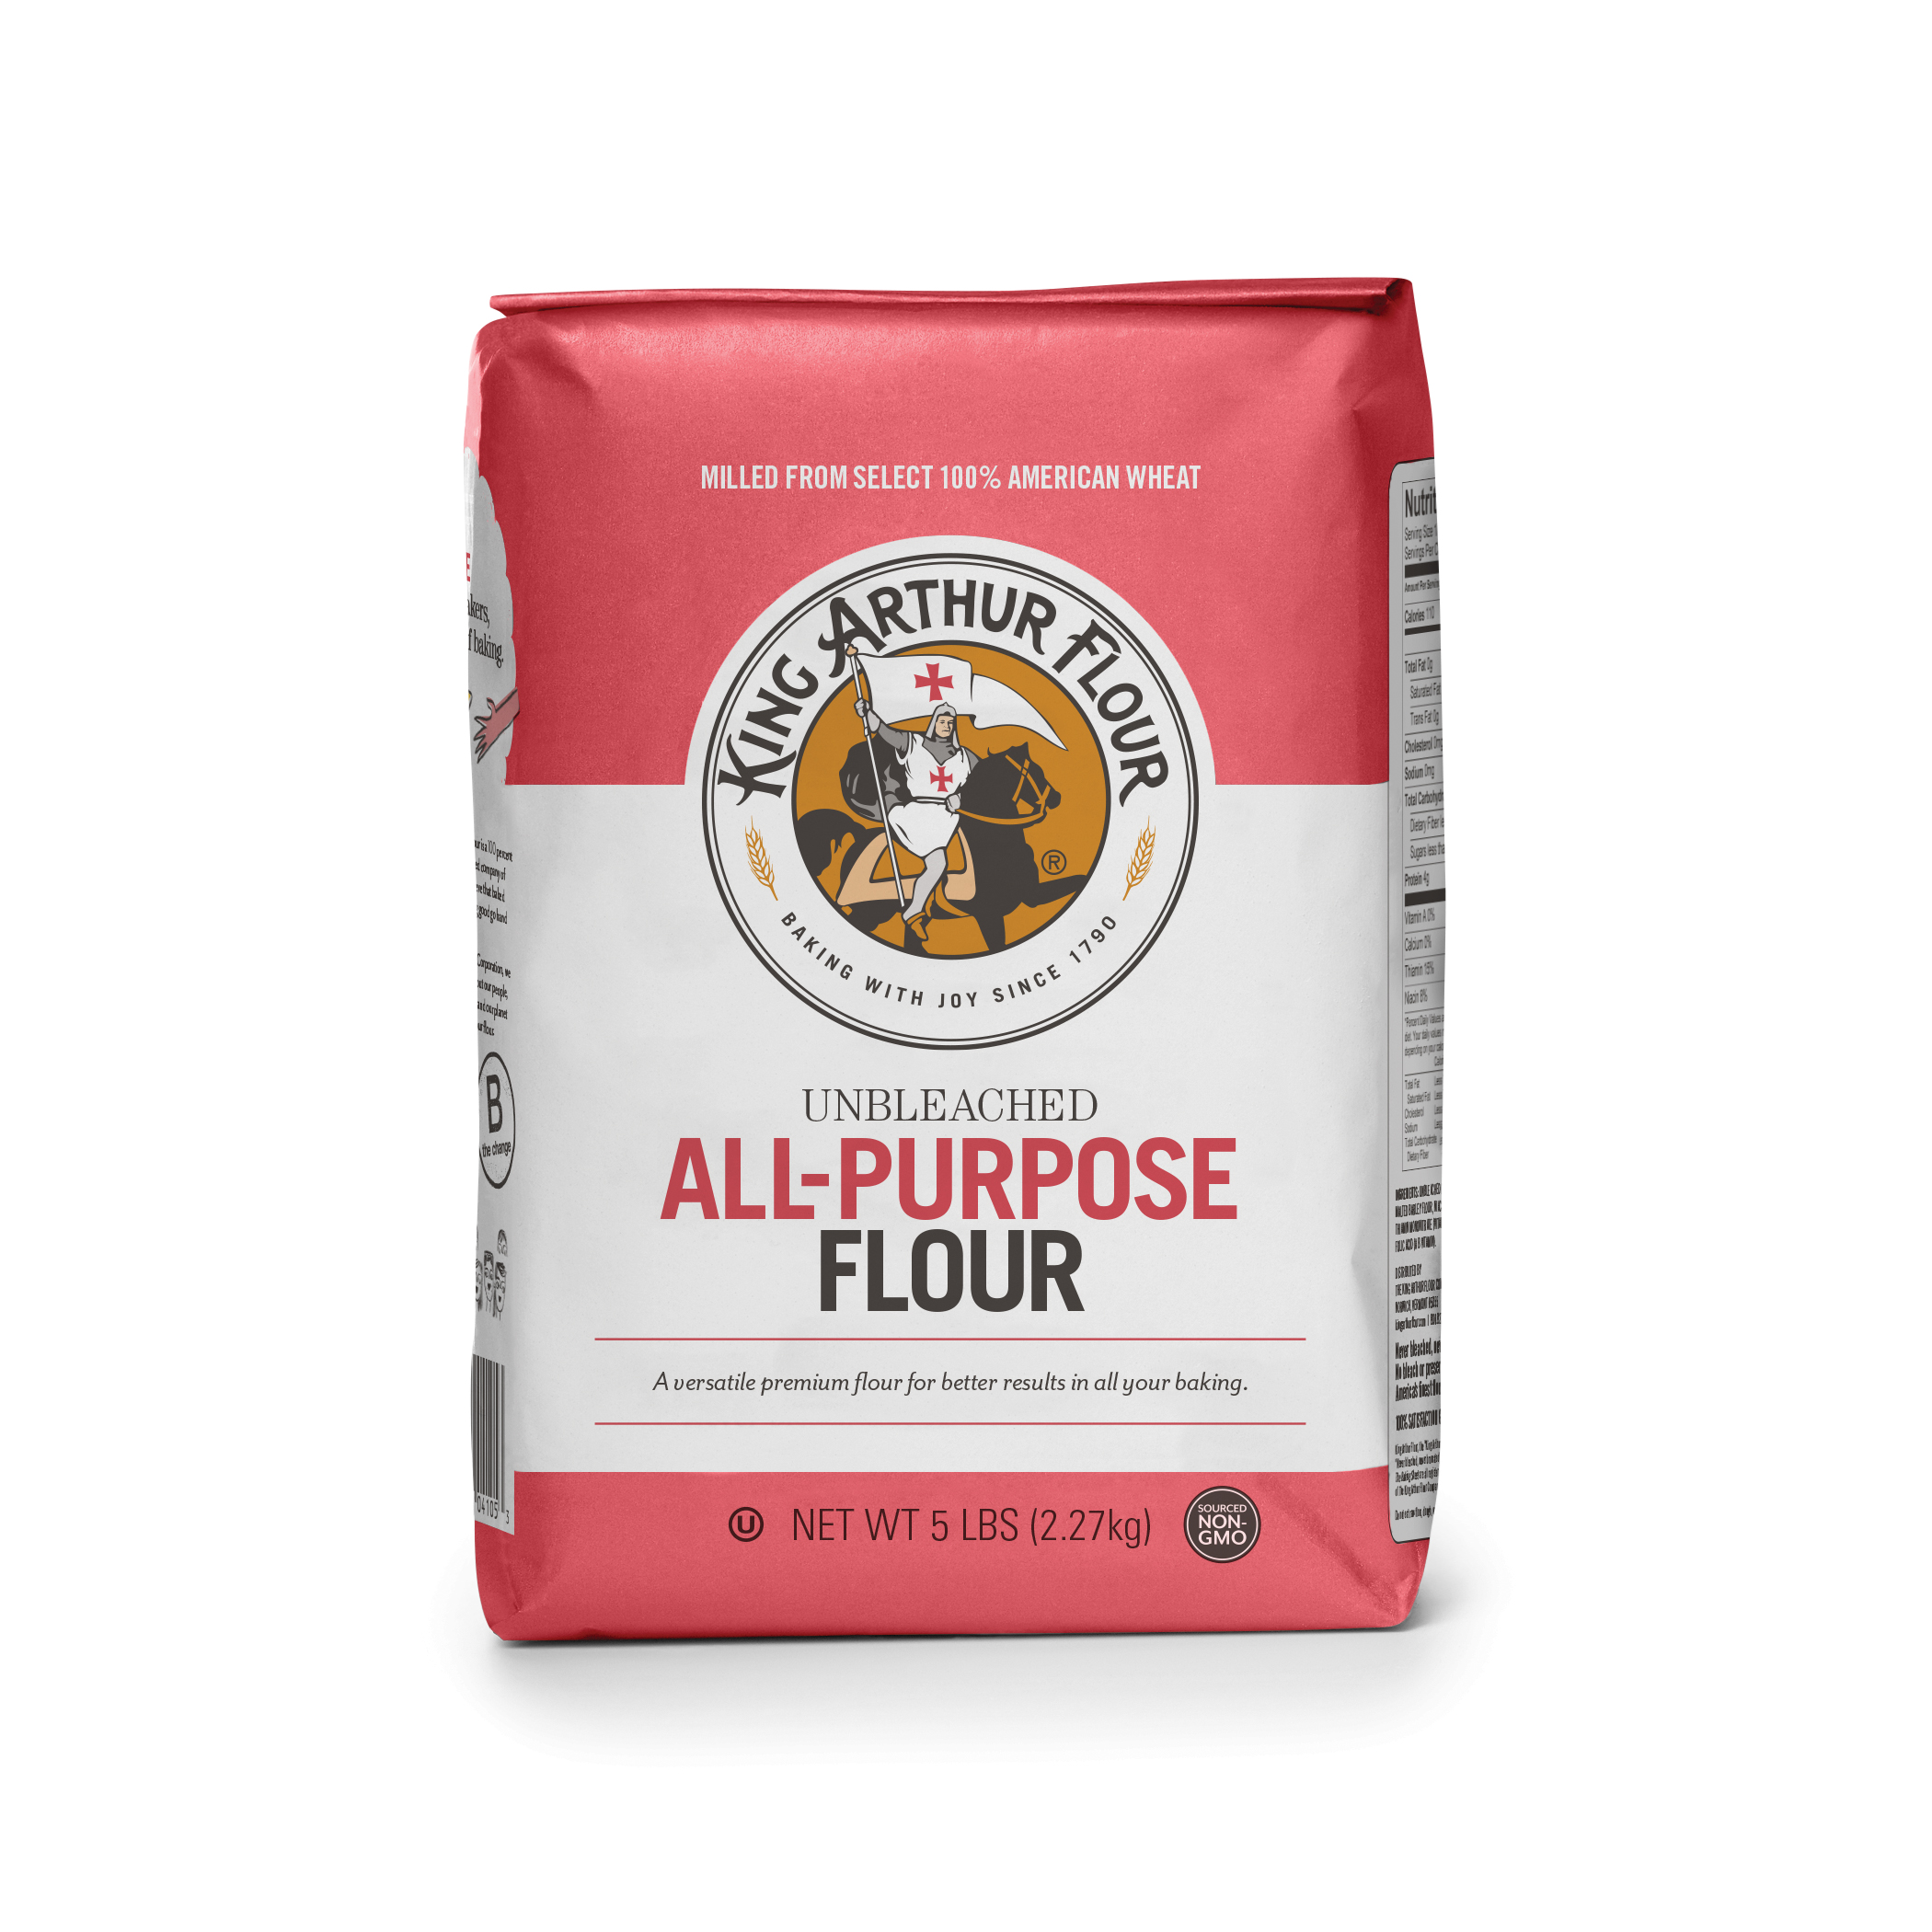 King Arthur Baking Company All-Purpose Unbleached Flour 5lbs - image 1 of 5